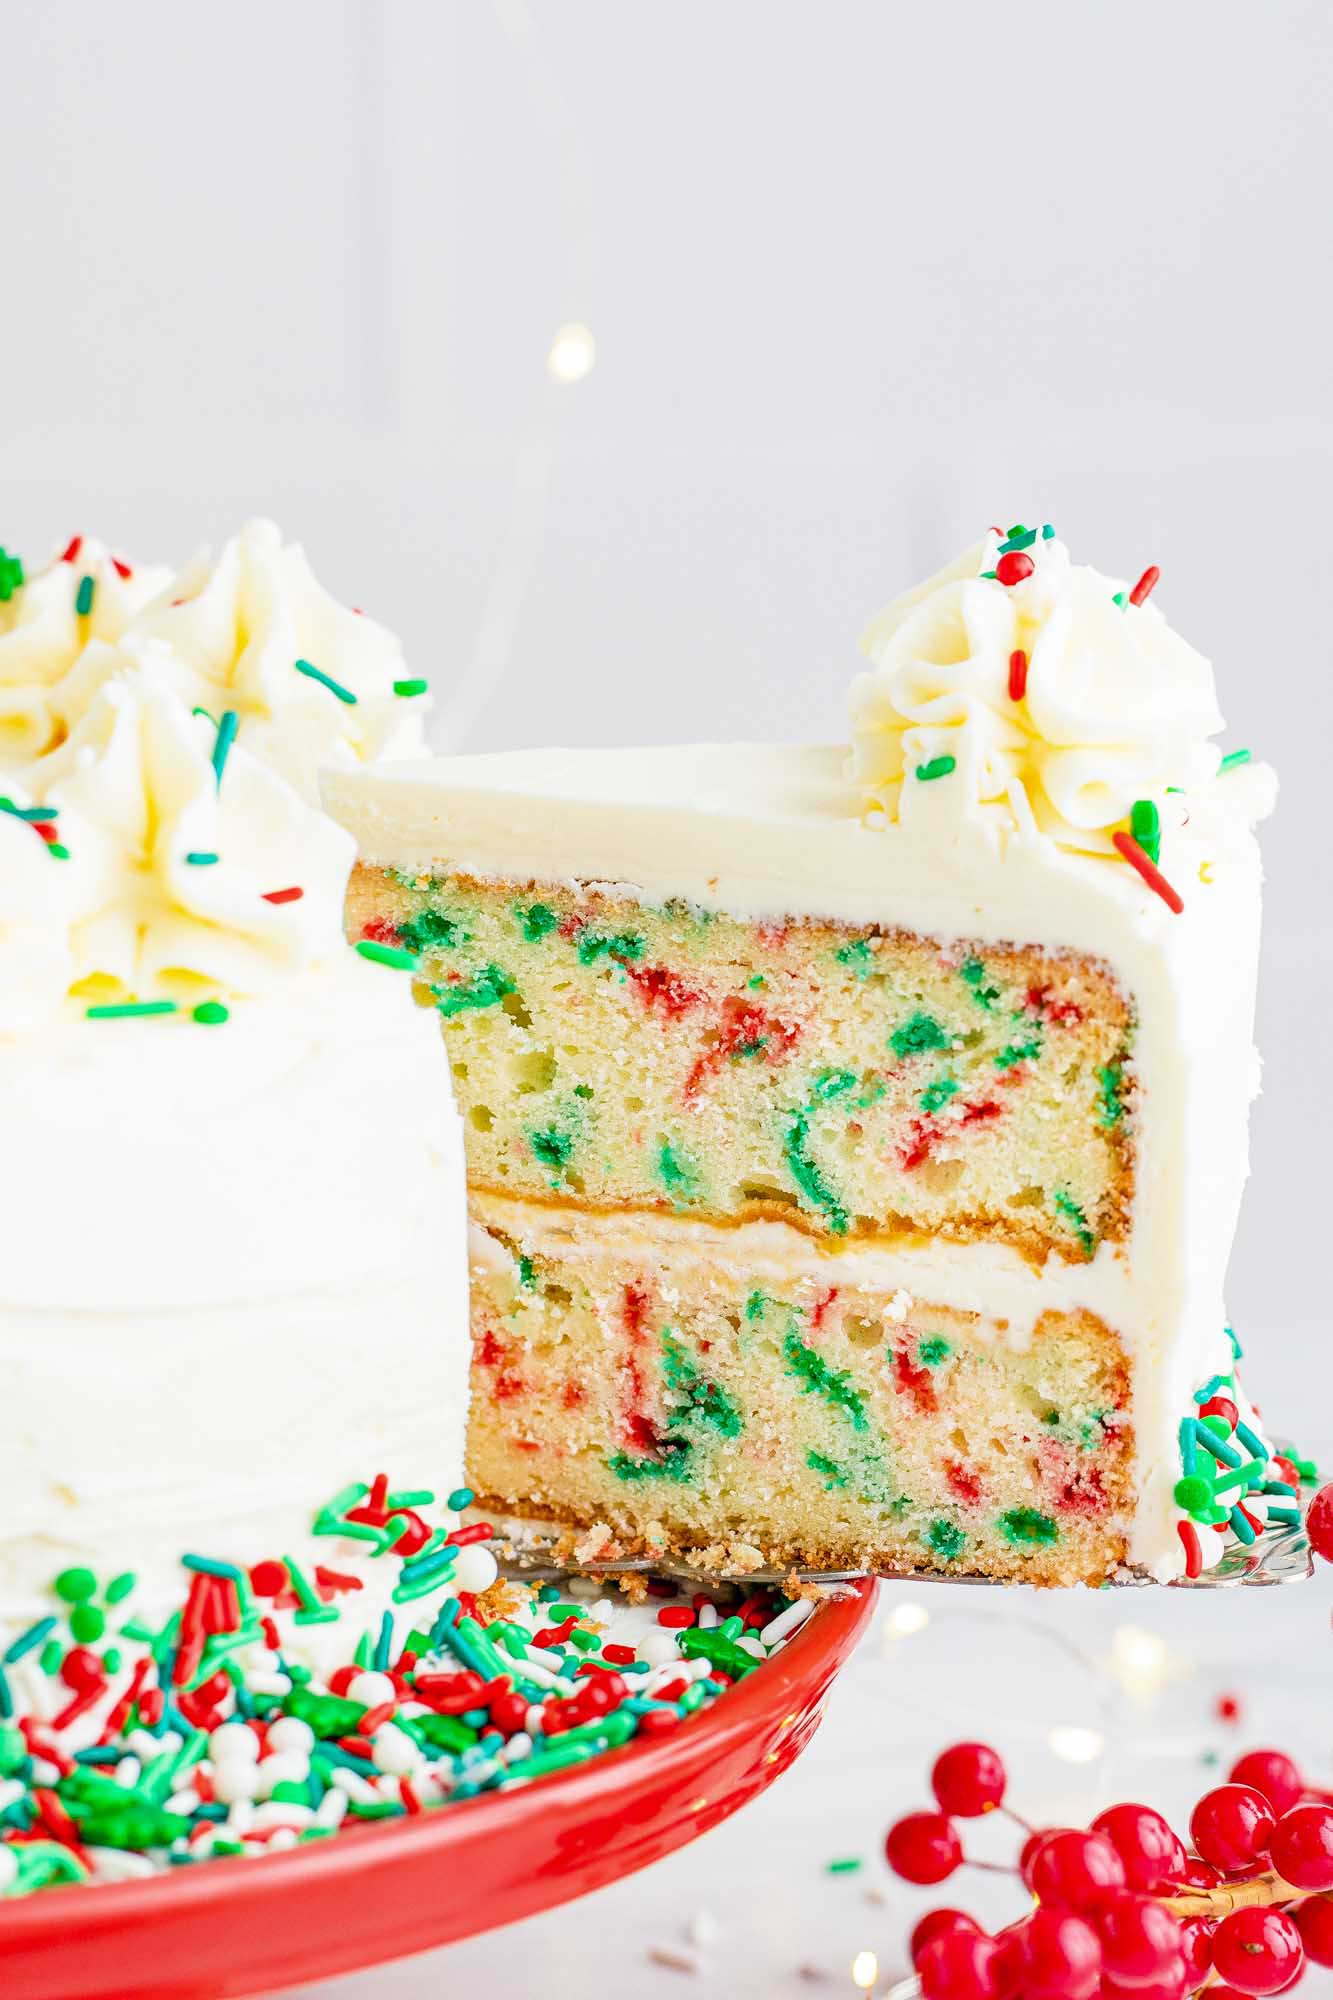 Taking a slice of Christmas funfetti cake from the whole cake